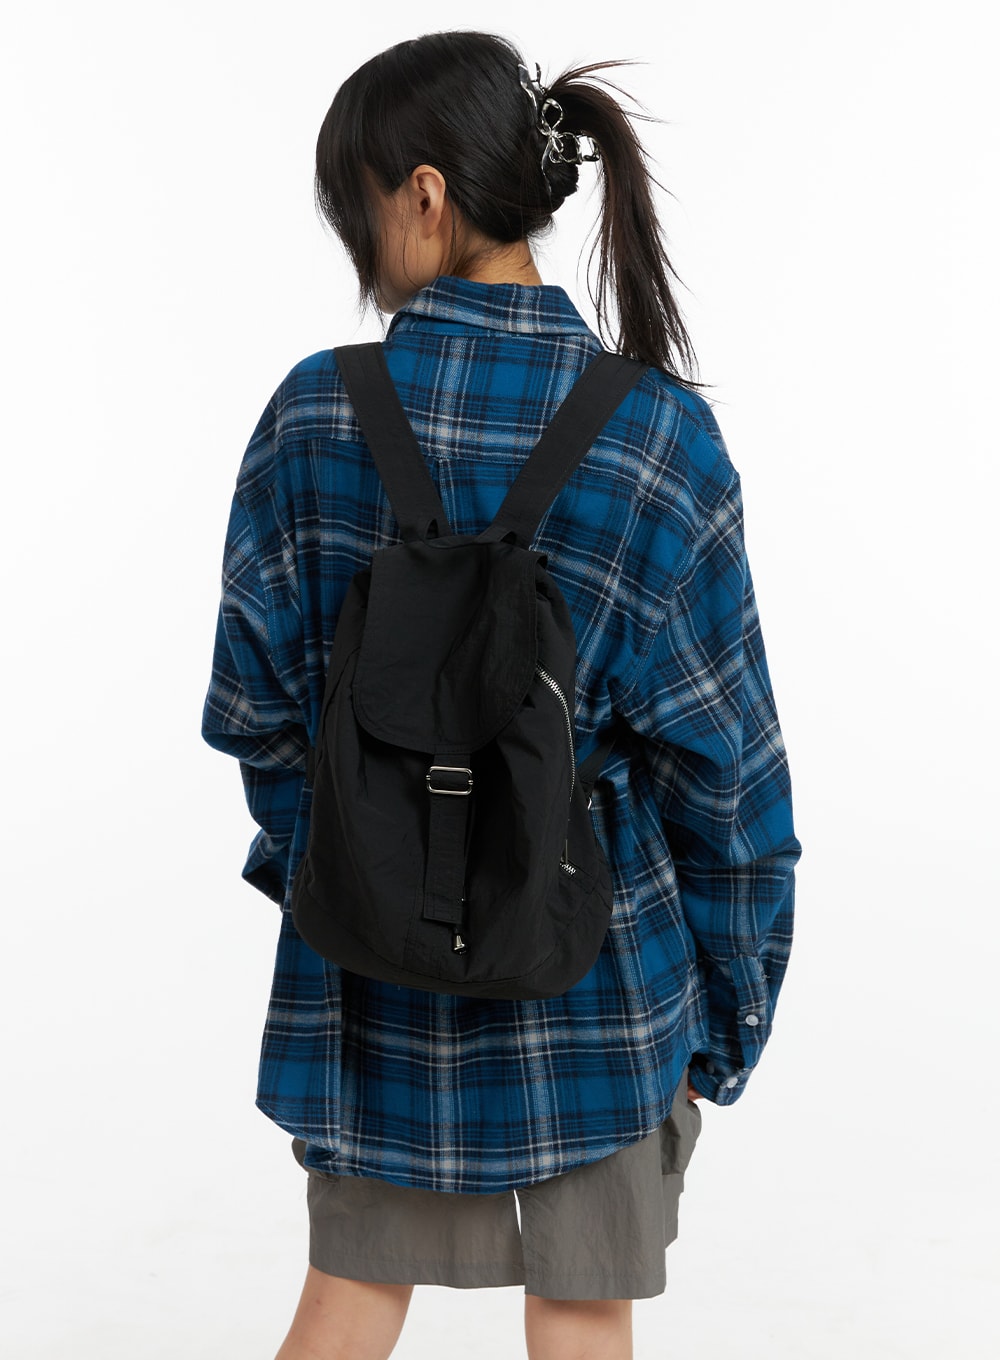 solid-nylon-buckle-backpack-cm413